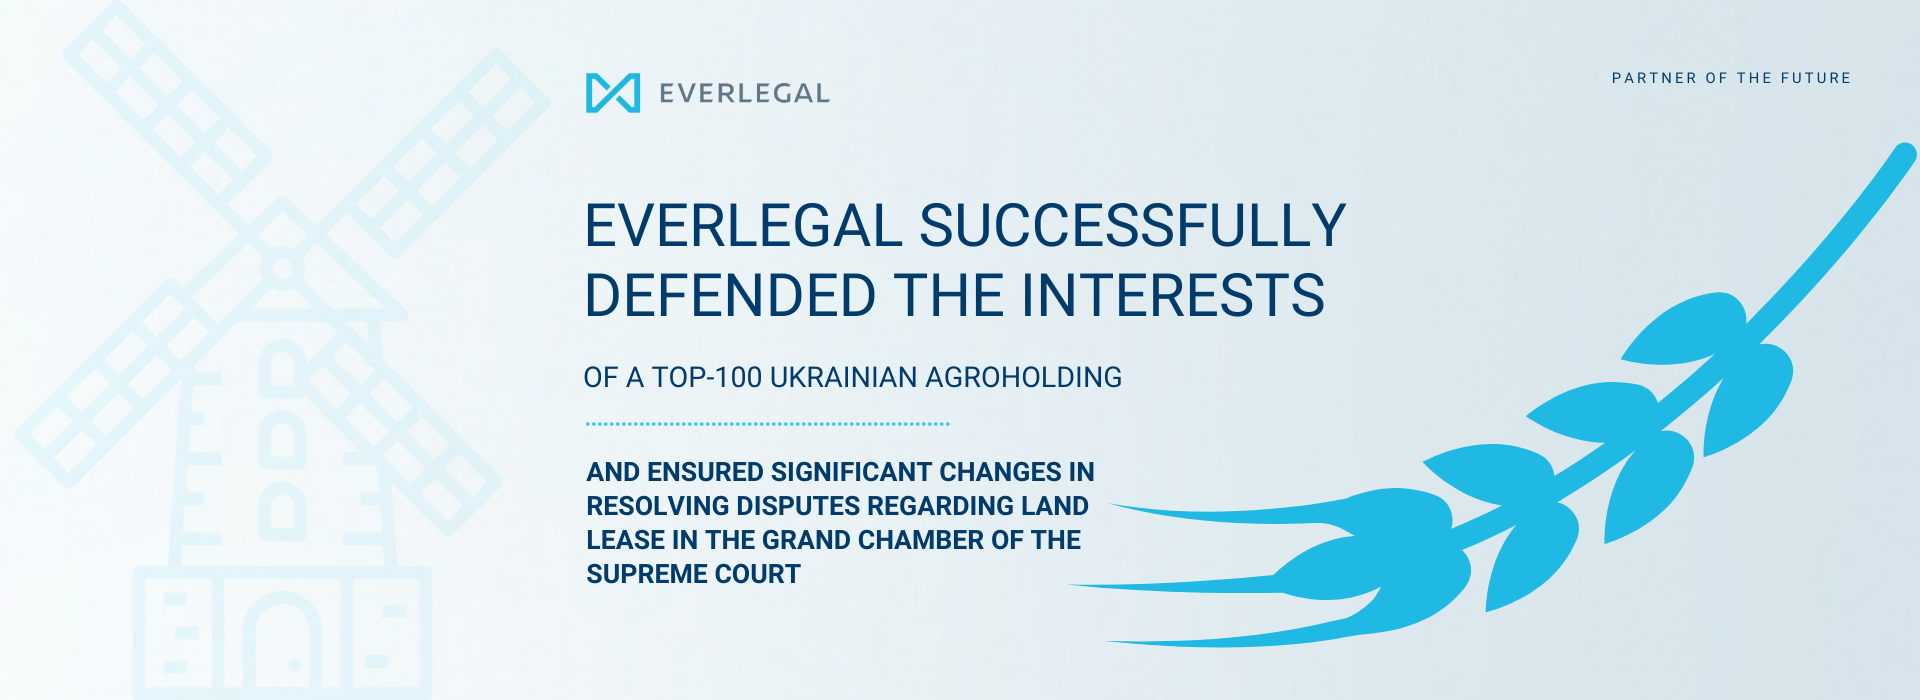 EVERLEGAL Successfully Defended the Interests of a Top-100 Ukrainian Agroholding and Ensured Significant Changes in Resolving Disputes Regarding Land Lease in the Grand Chamber of the Supreme Court